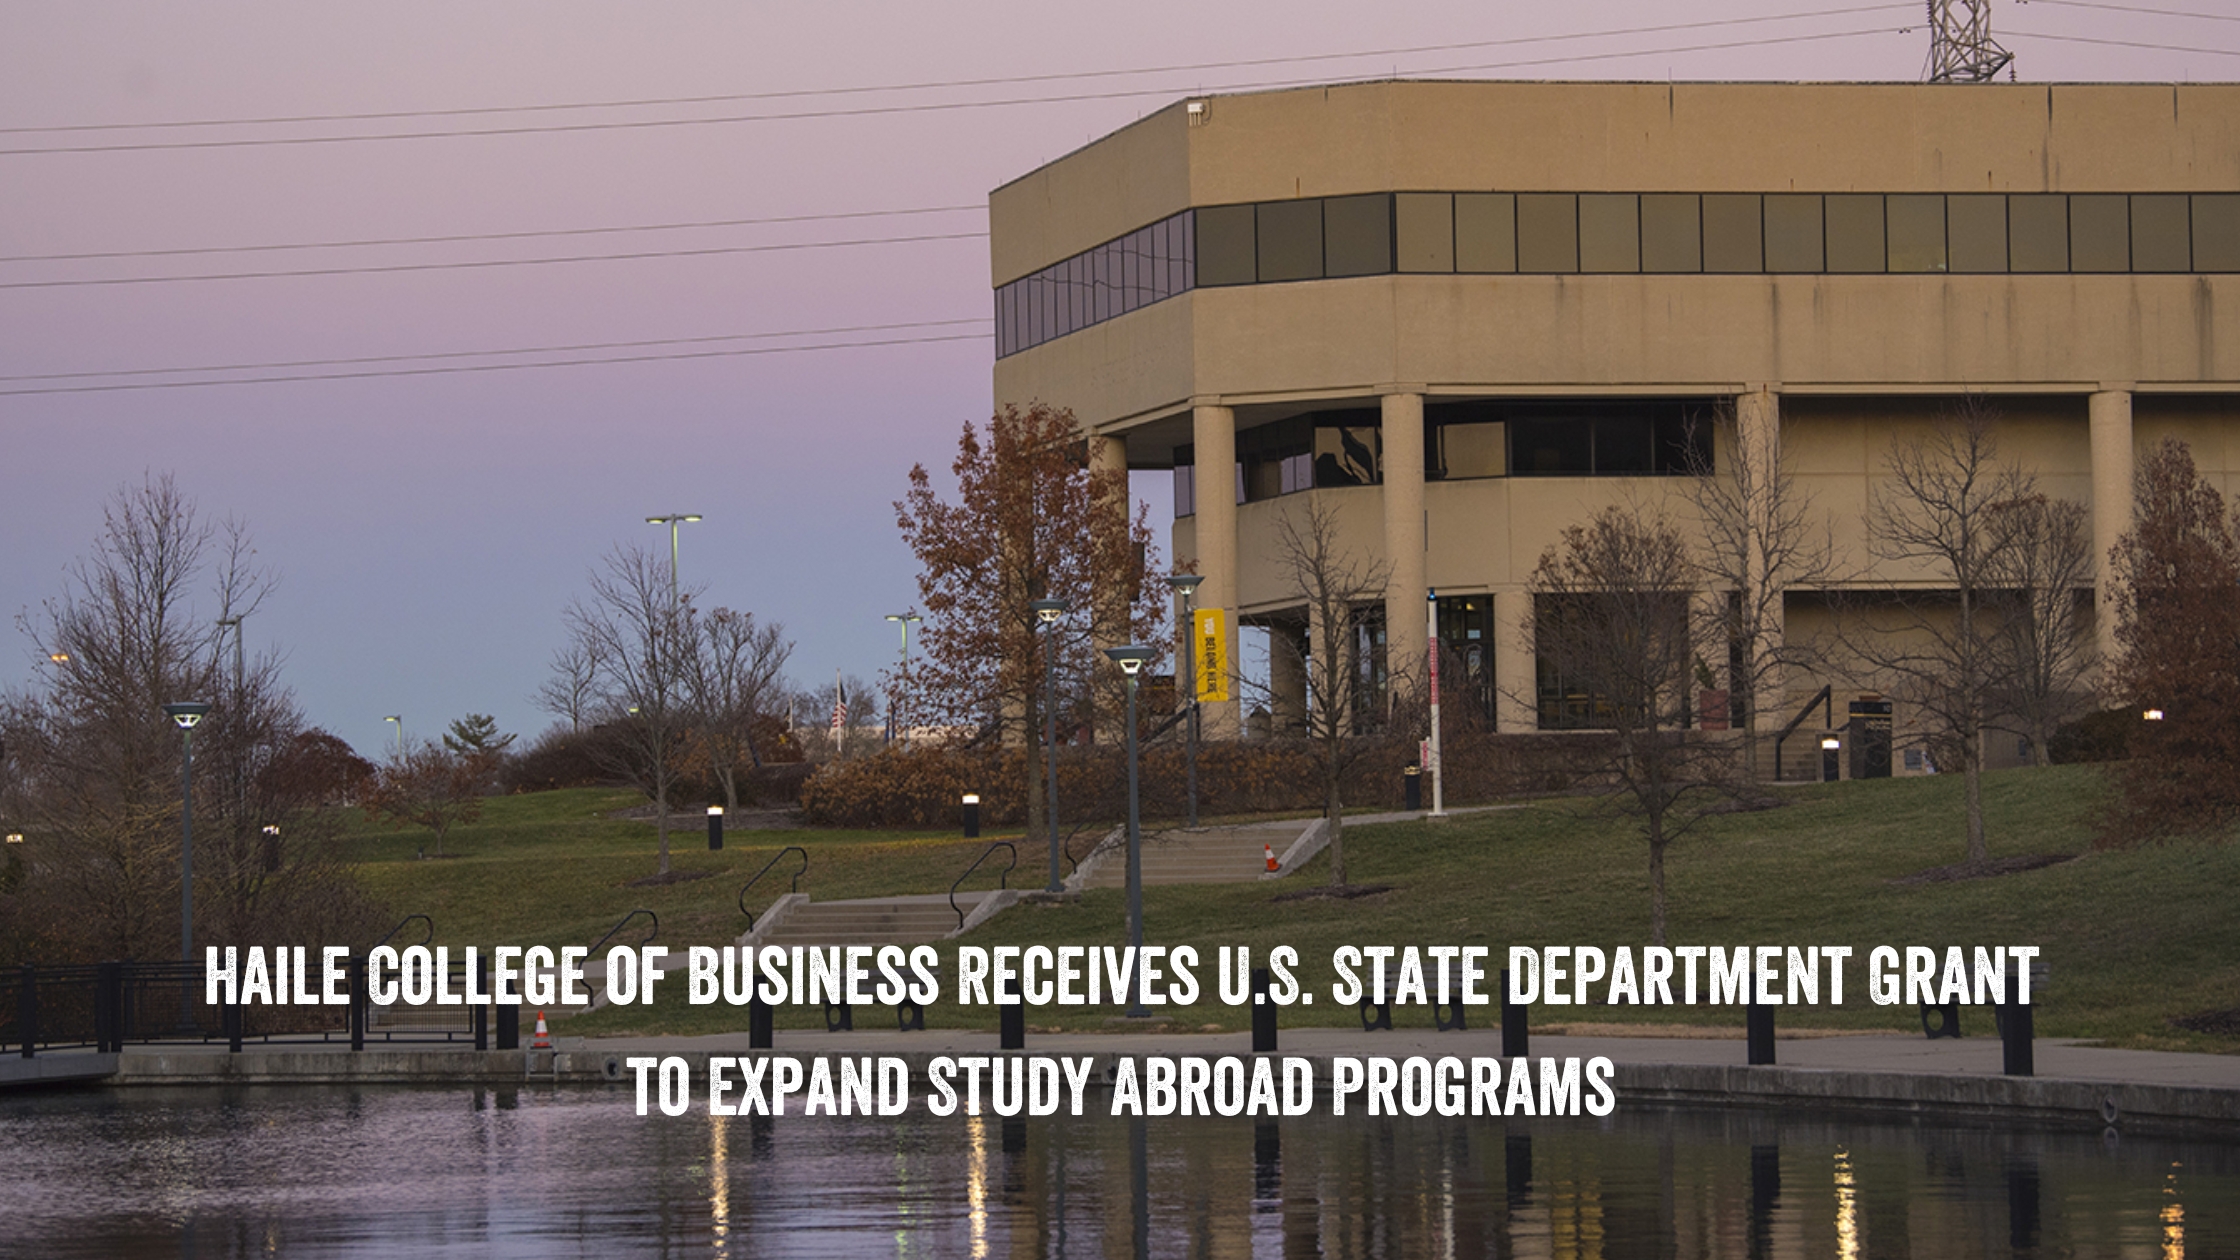 Haile College of Business Receives U.S. State Department Grant to Expand Study Abroad Programs